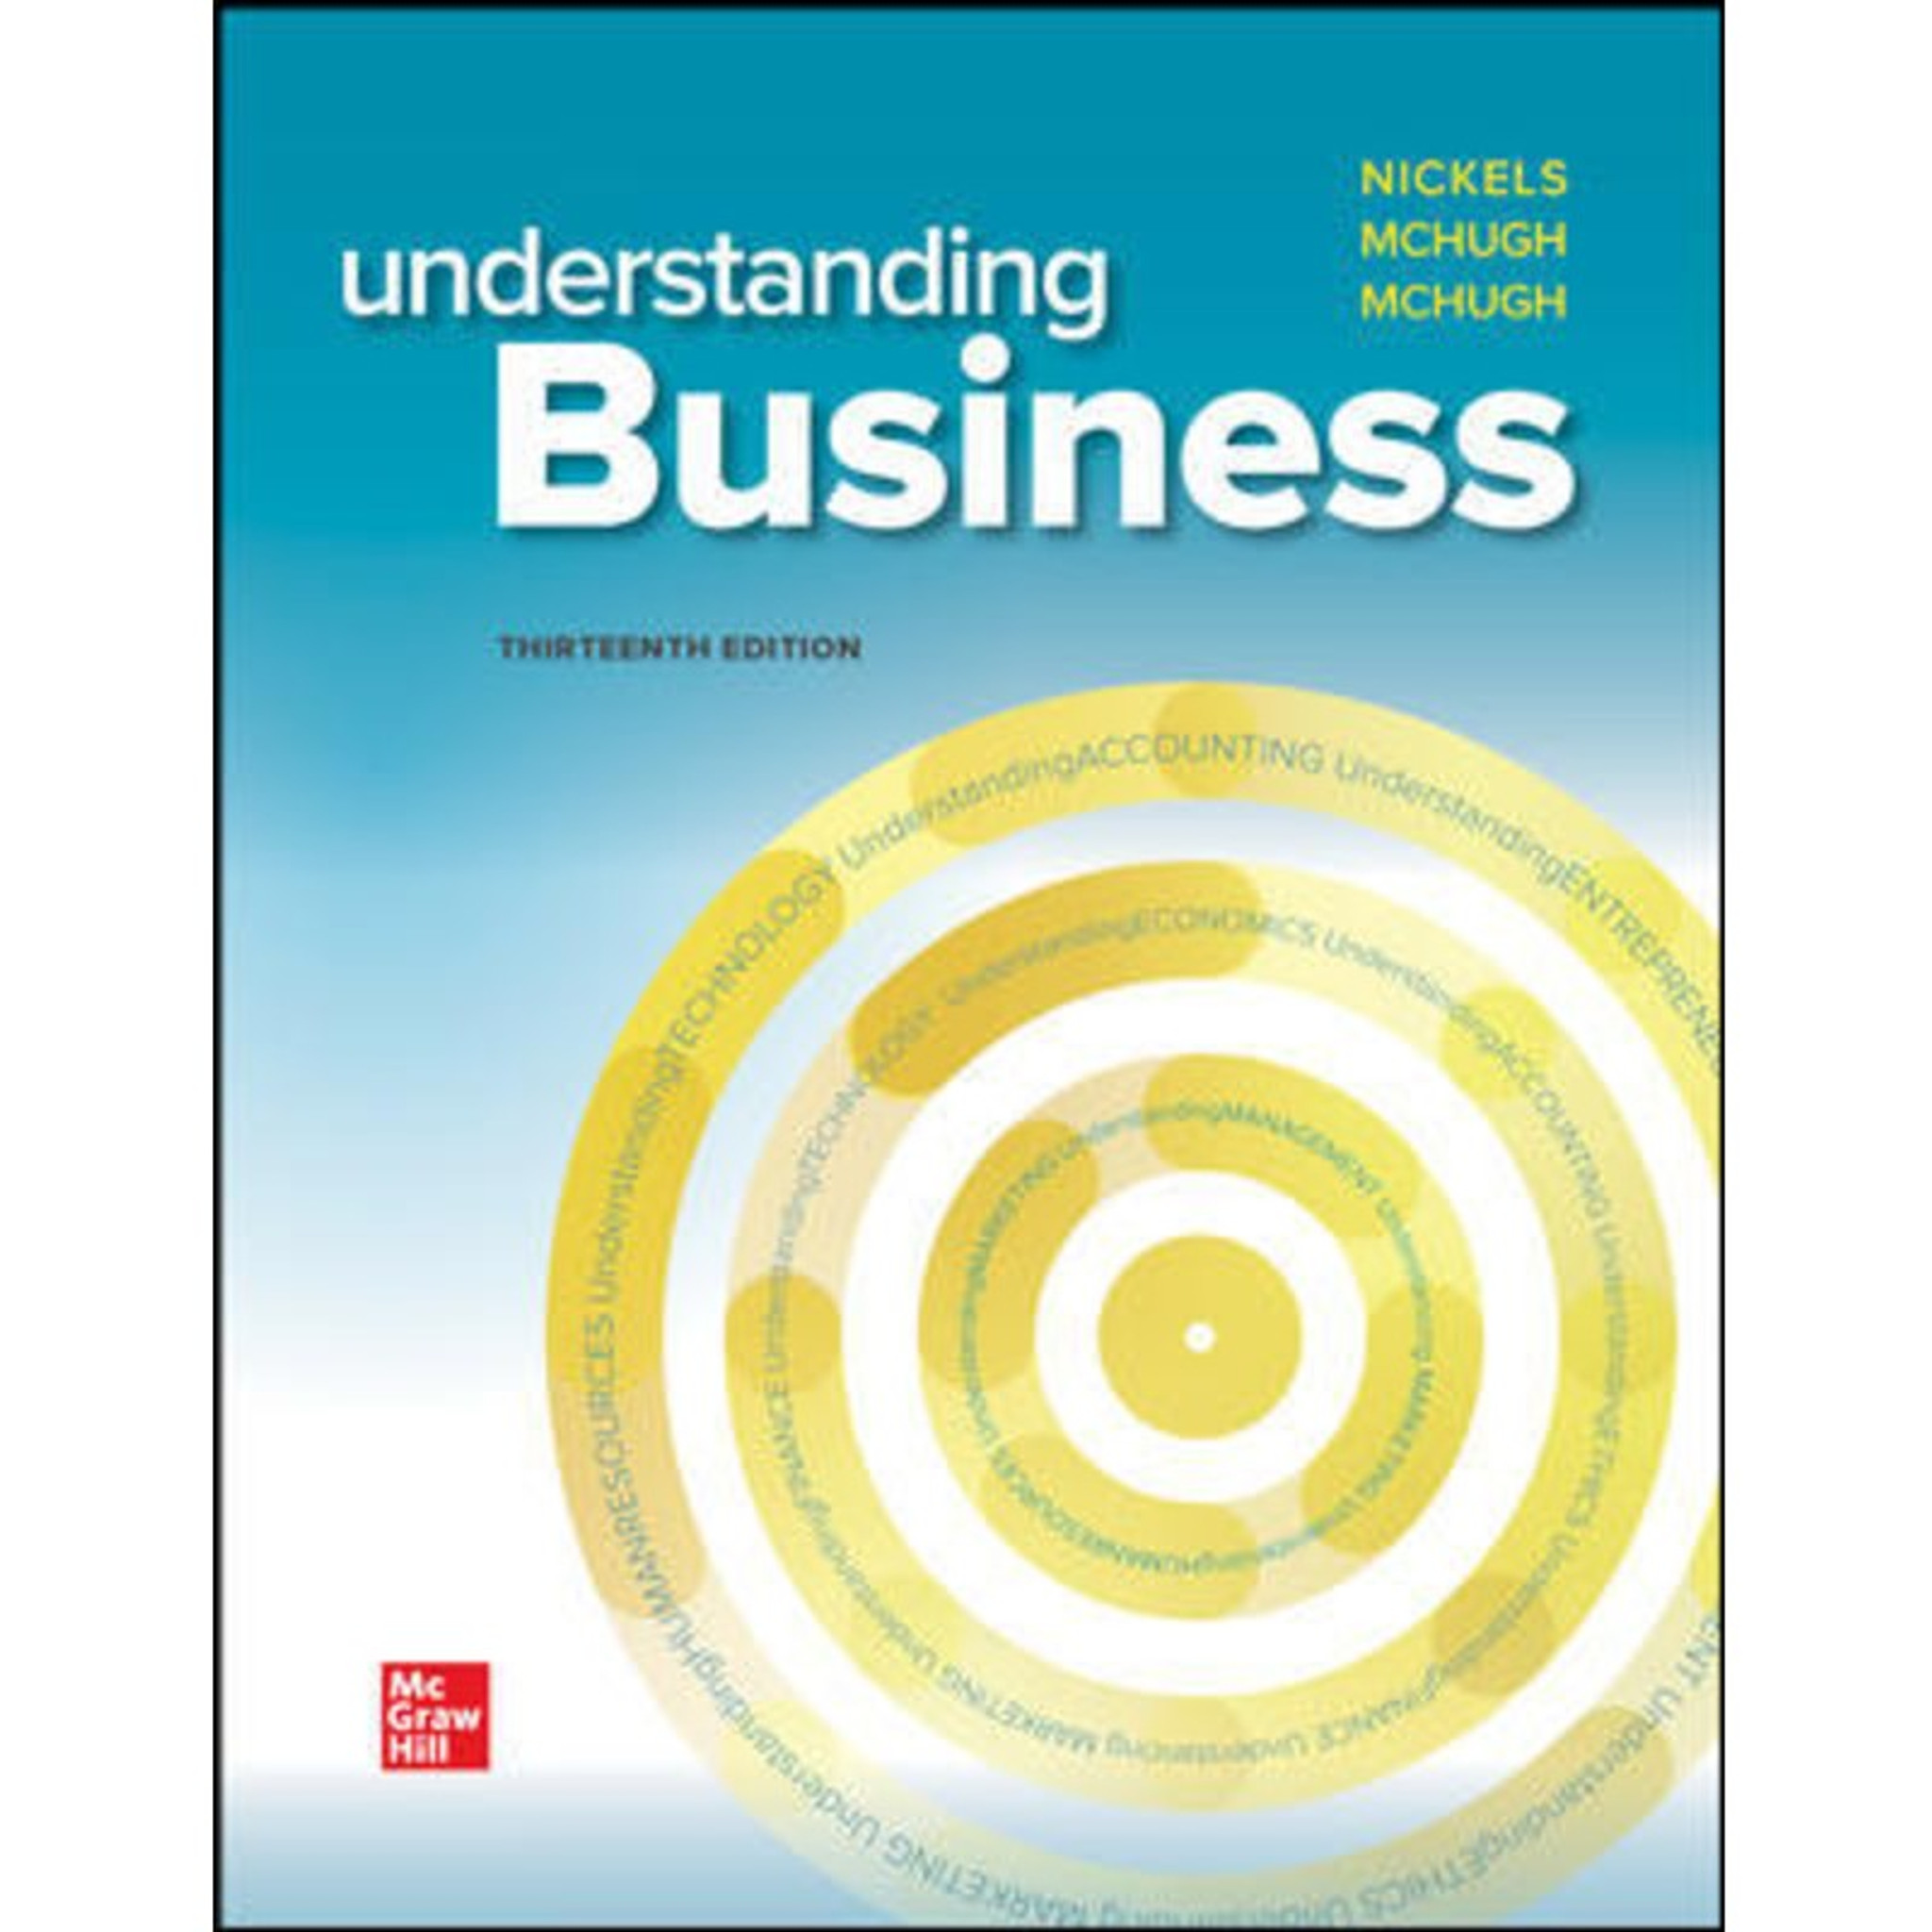 Understanding Business (13th Edition) William Nickels, James McHugh and